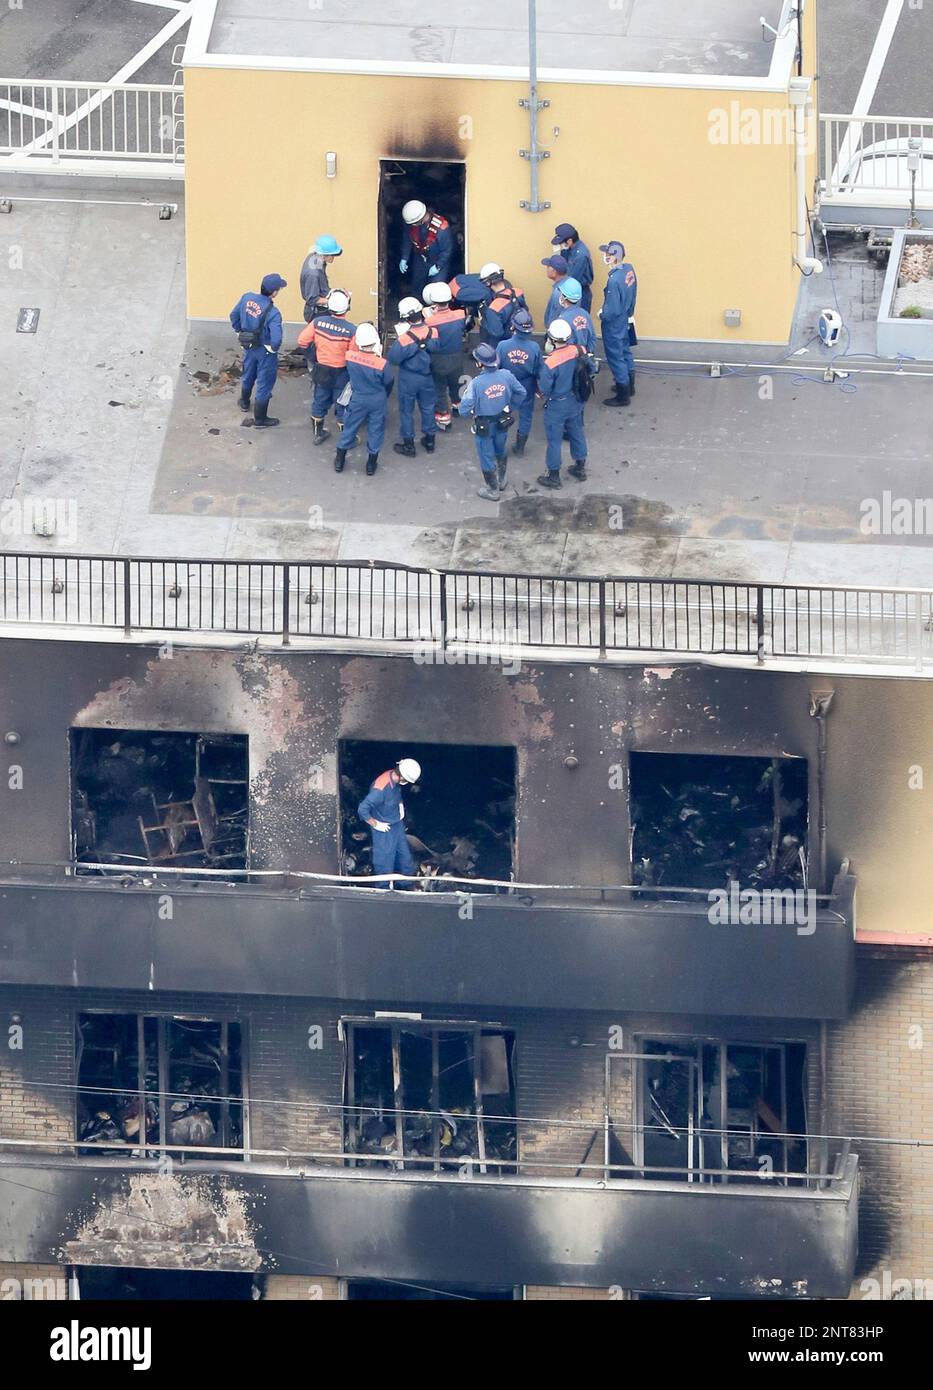 An aerial photo shows officials conduct an investigation at the arson site  of Kyoto Animation Co., Ltd. (so-called Kyoani) in Kyoto on July 20, 2019,  two days after the case. On the